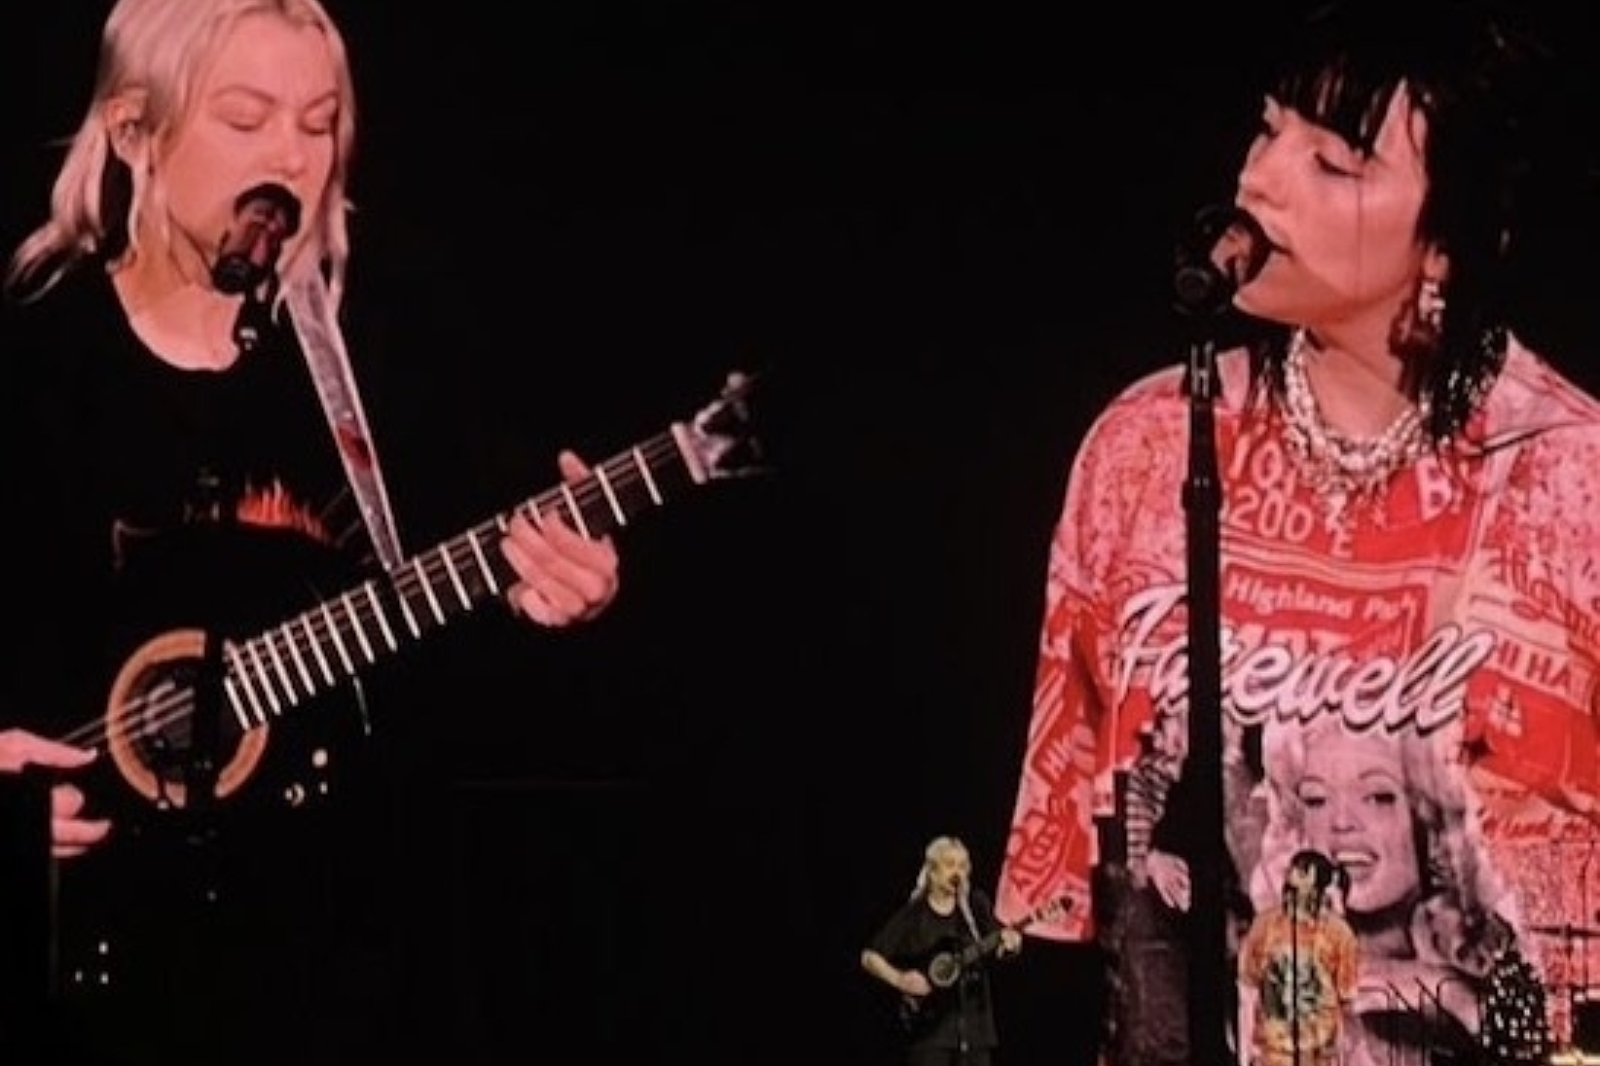 Watch Phoebe Bridgers and Billie Eilish perform 'Motion Sickness' together in LA